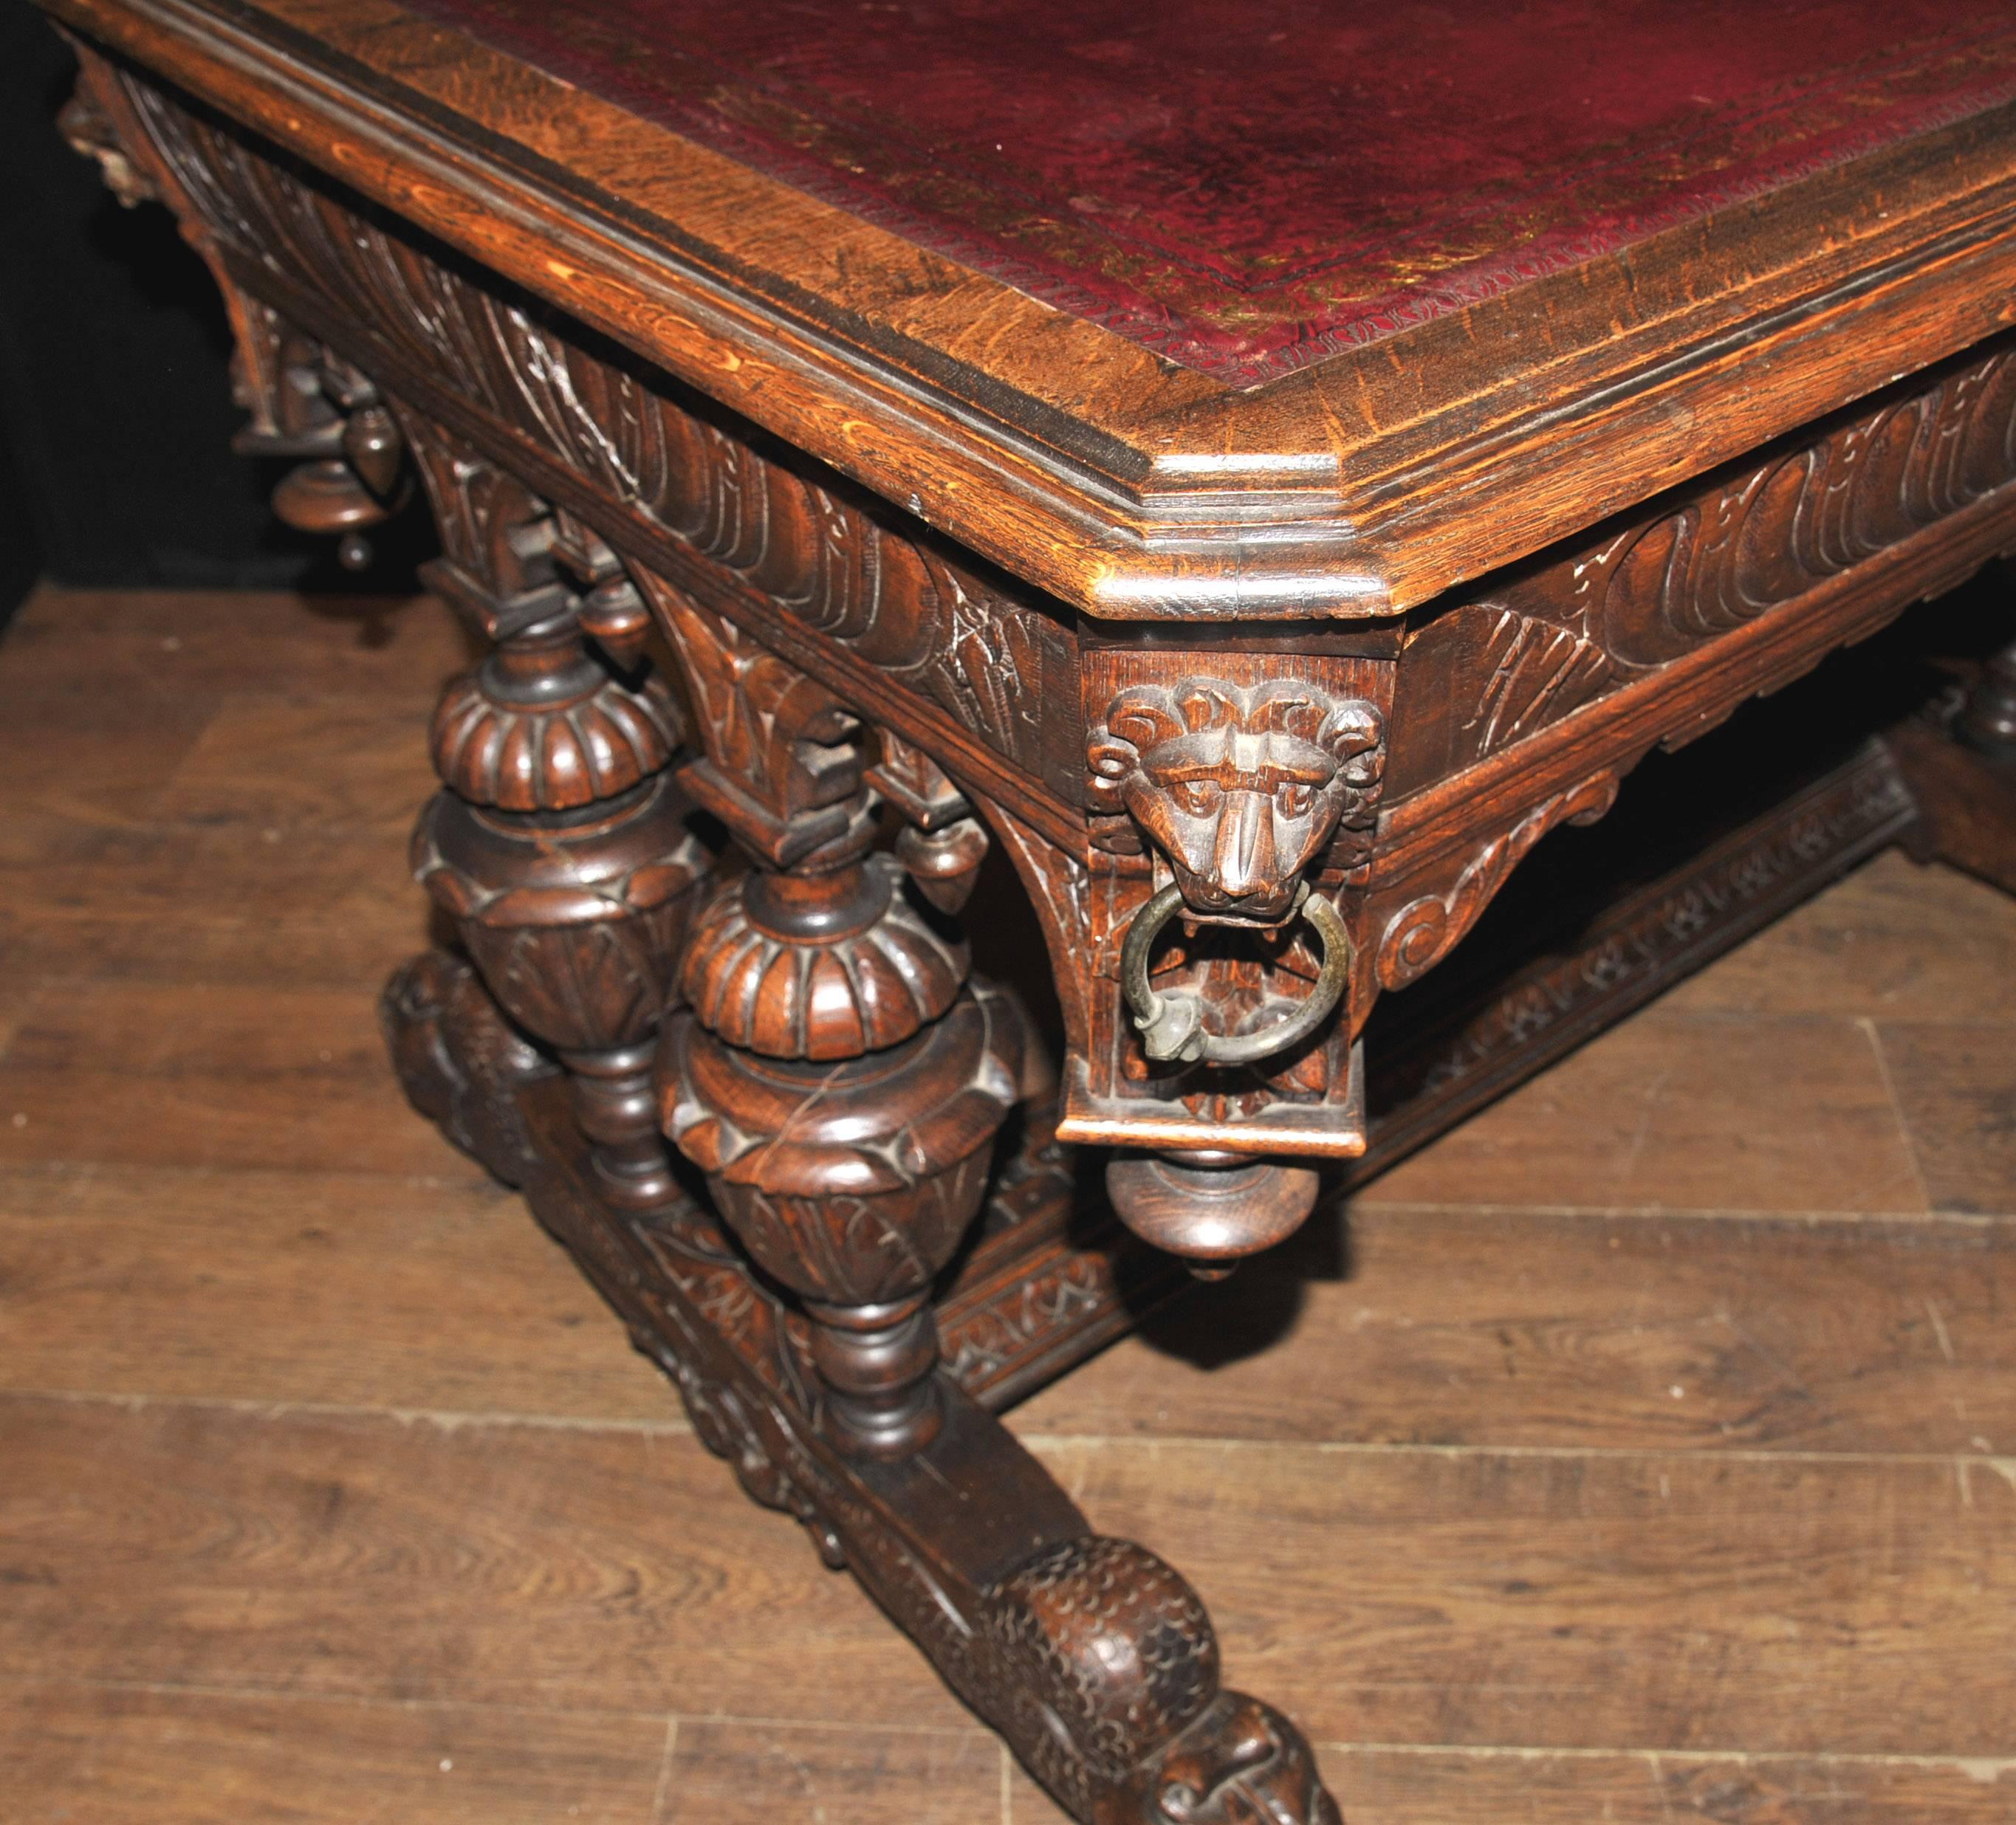 Stunning antique 19th century carved oak library table which would also function as a great desk.
Intricately hand carved the details are exquisite with lions head handles, urn legs, sea serpent legs and other intricate motifs and designs.
Really